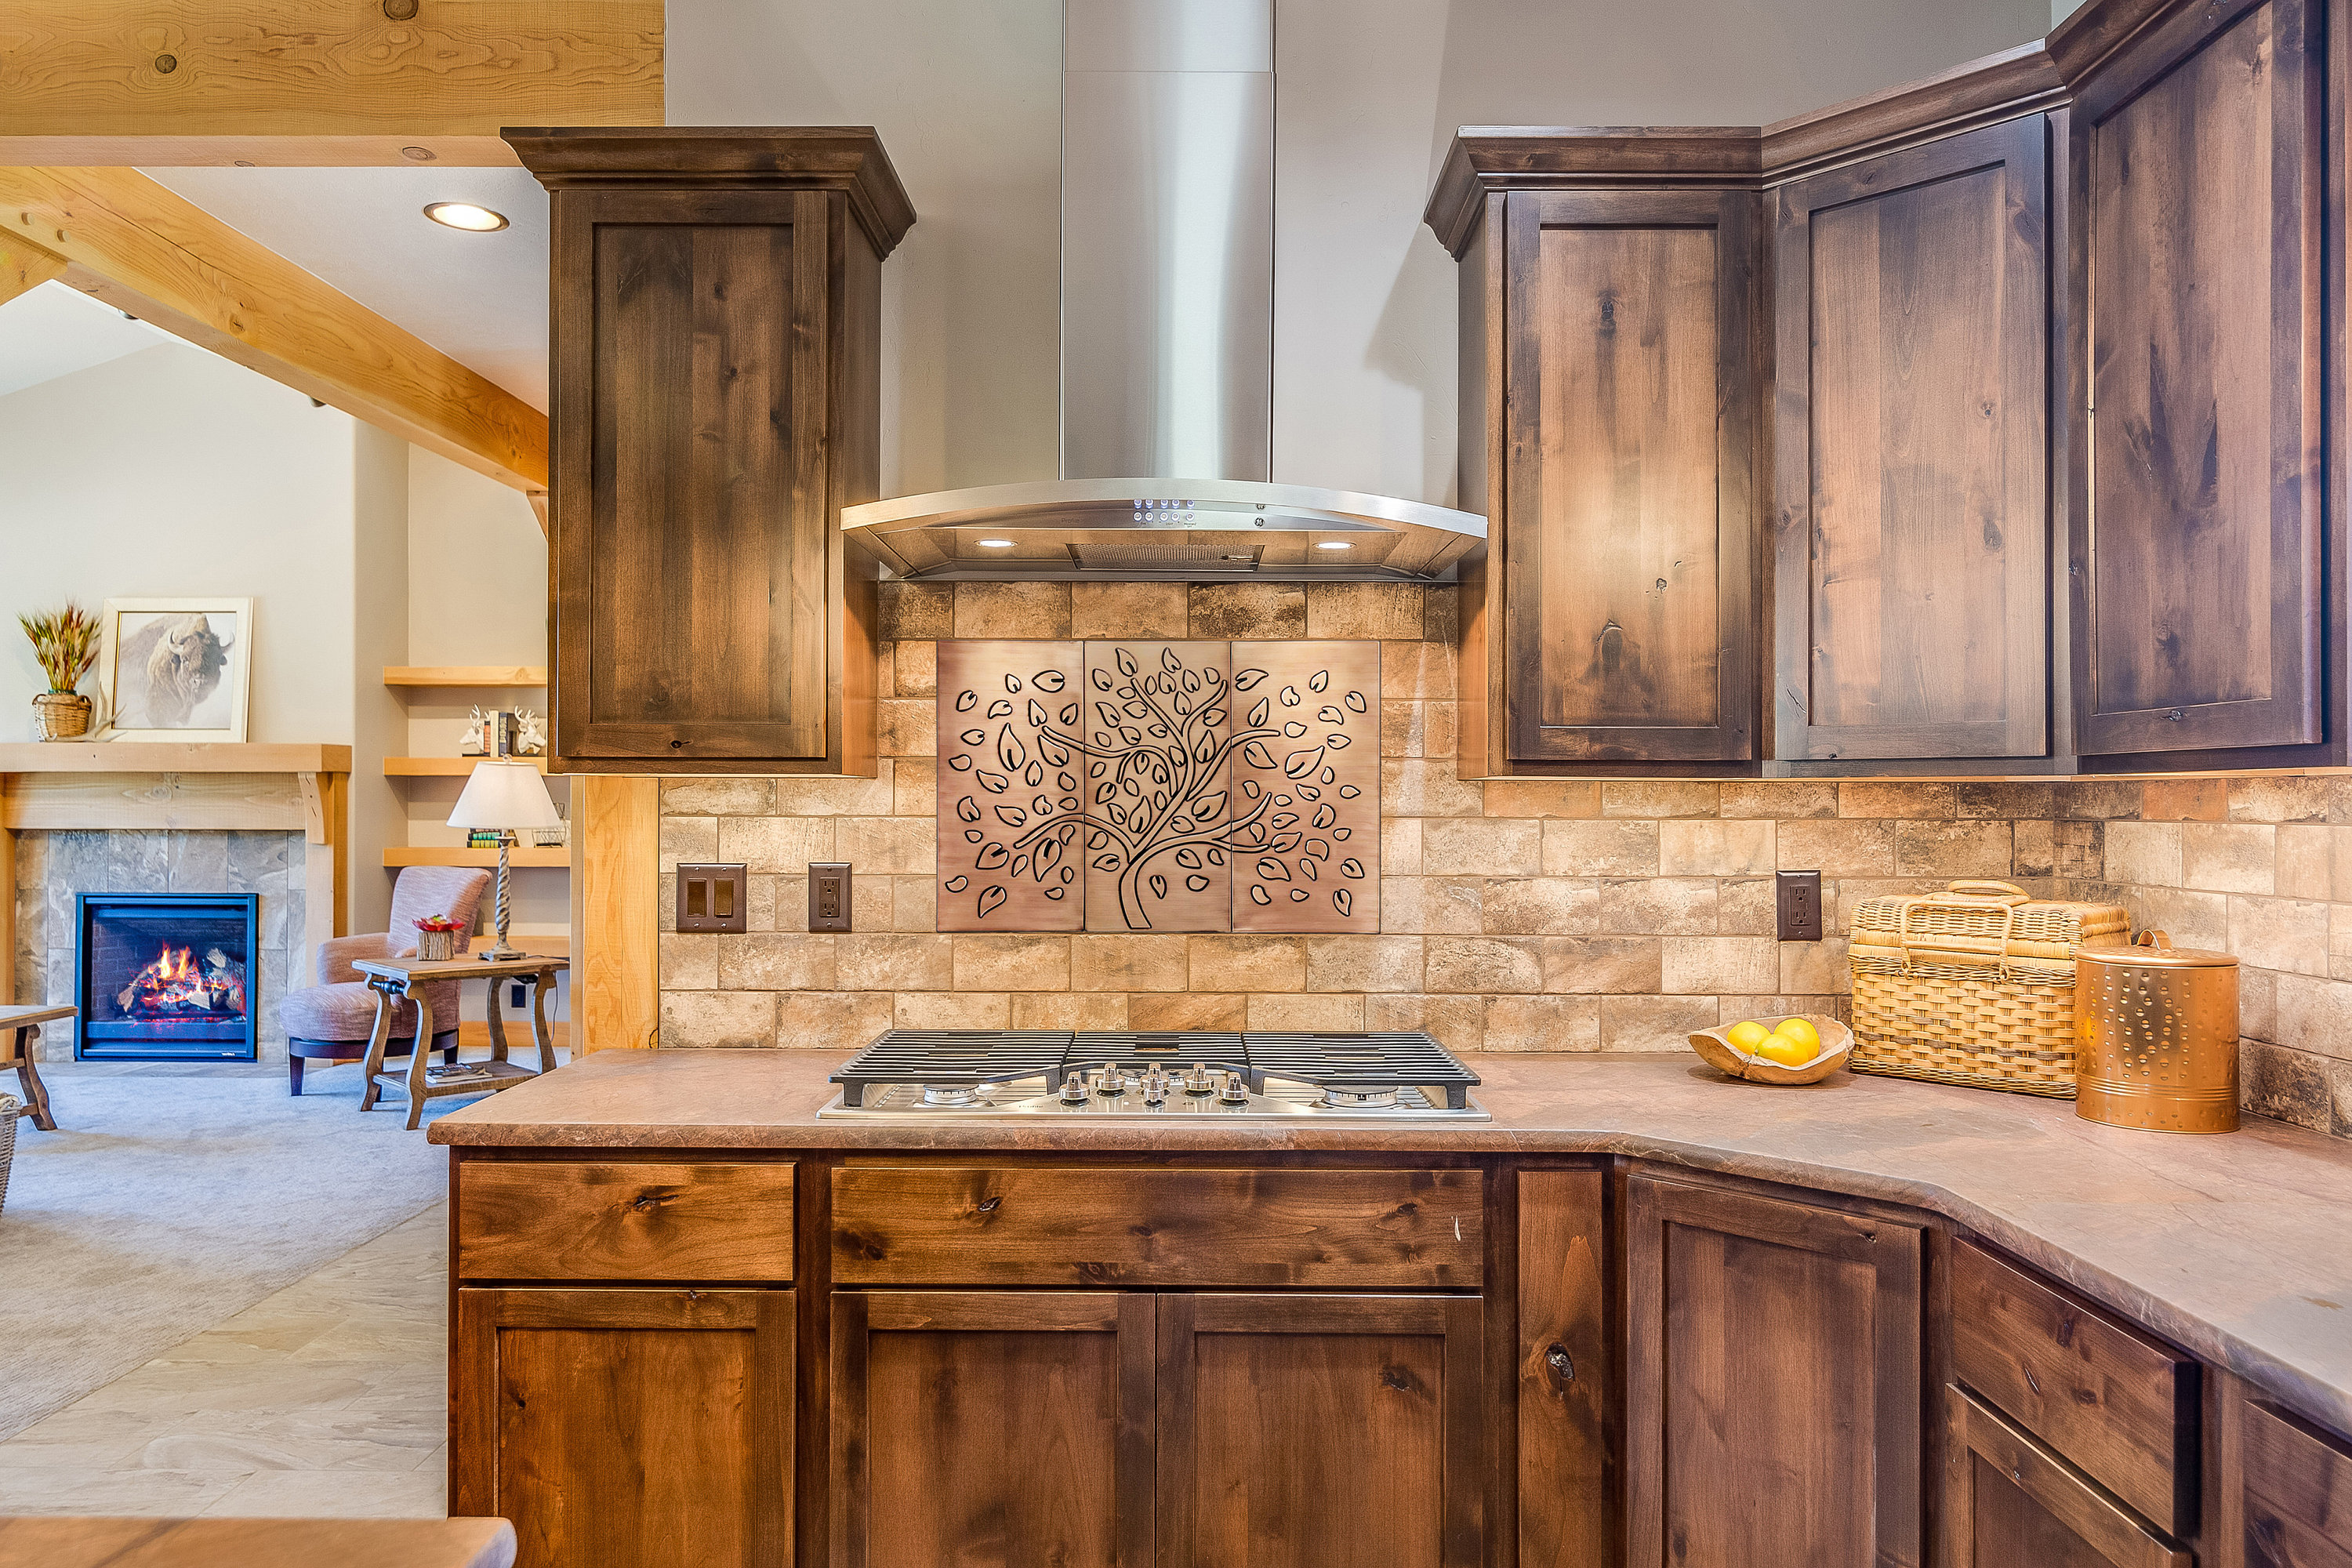 5 Charmingly Rustic Kitchen Ideas You'll Want to Steal - Rustico Tile